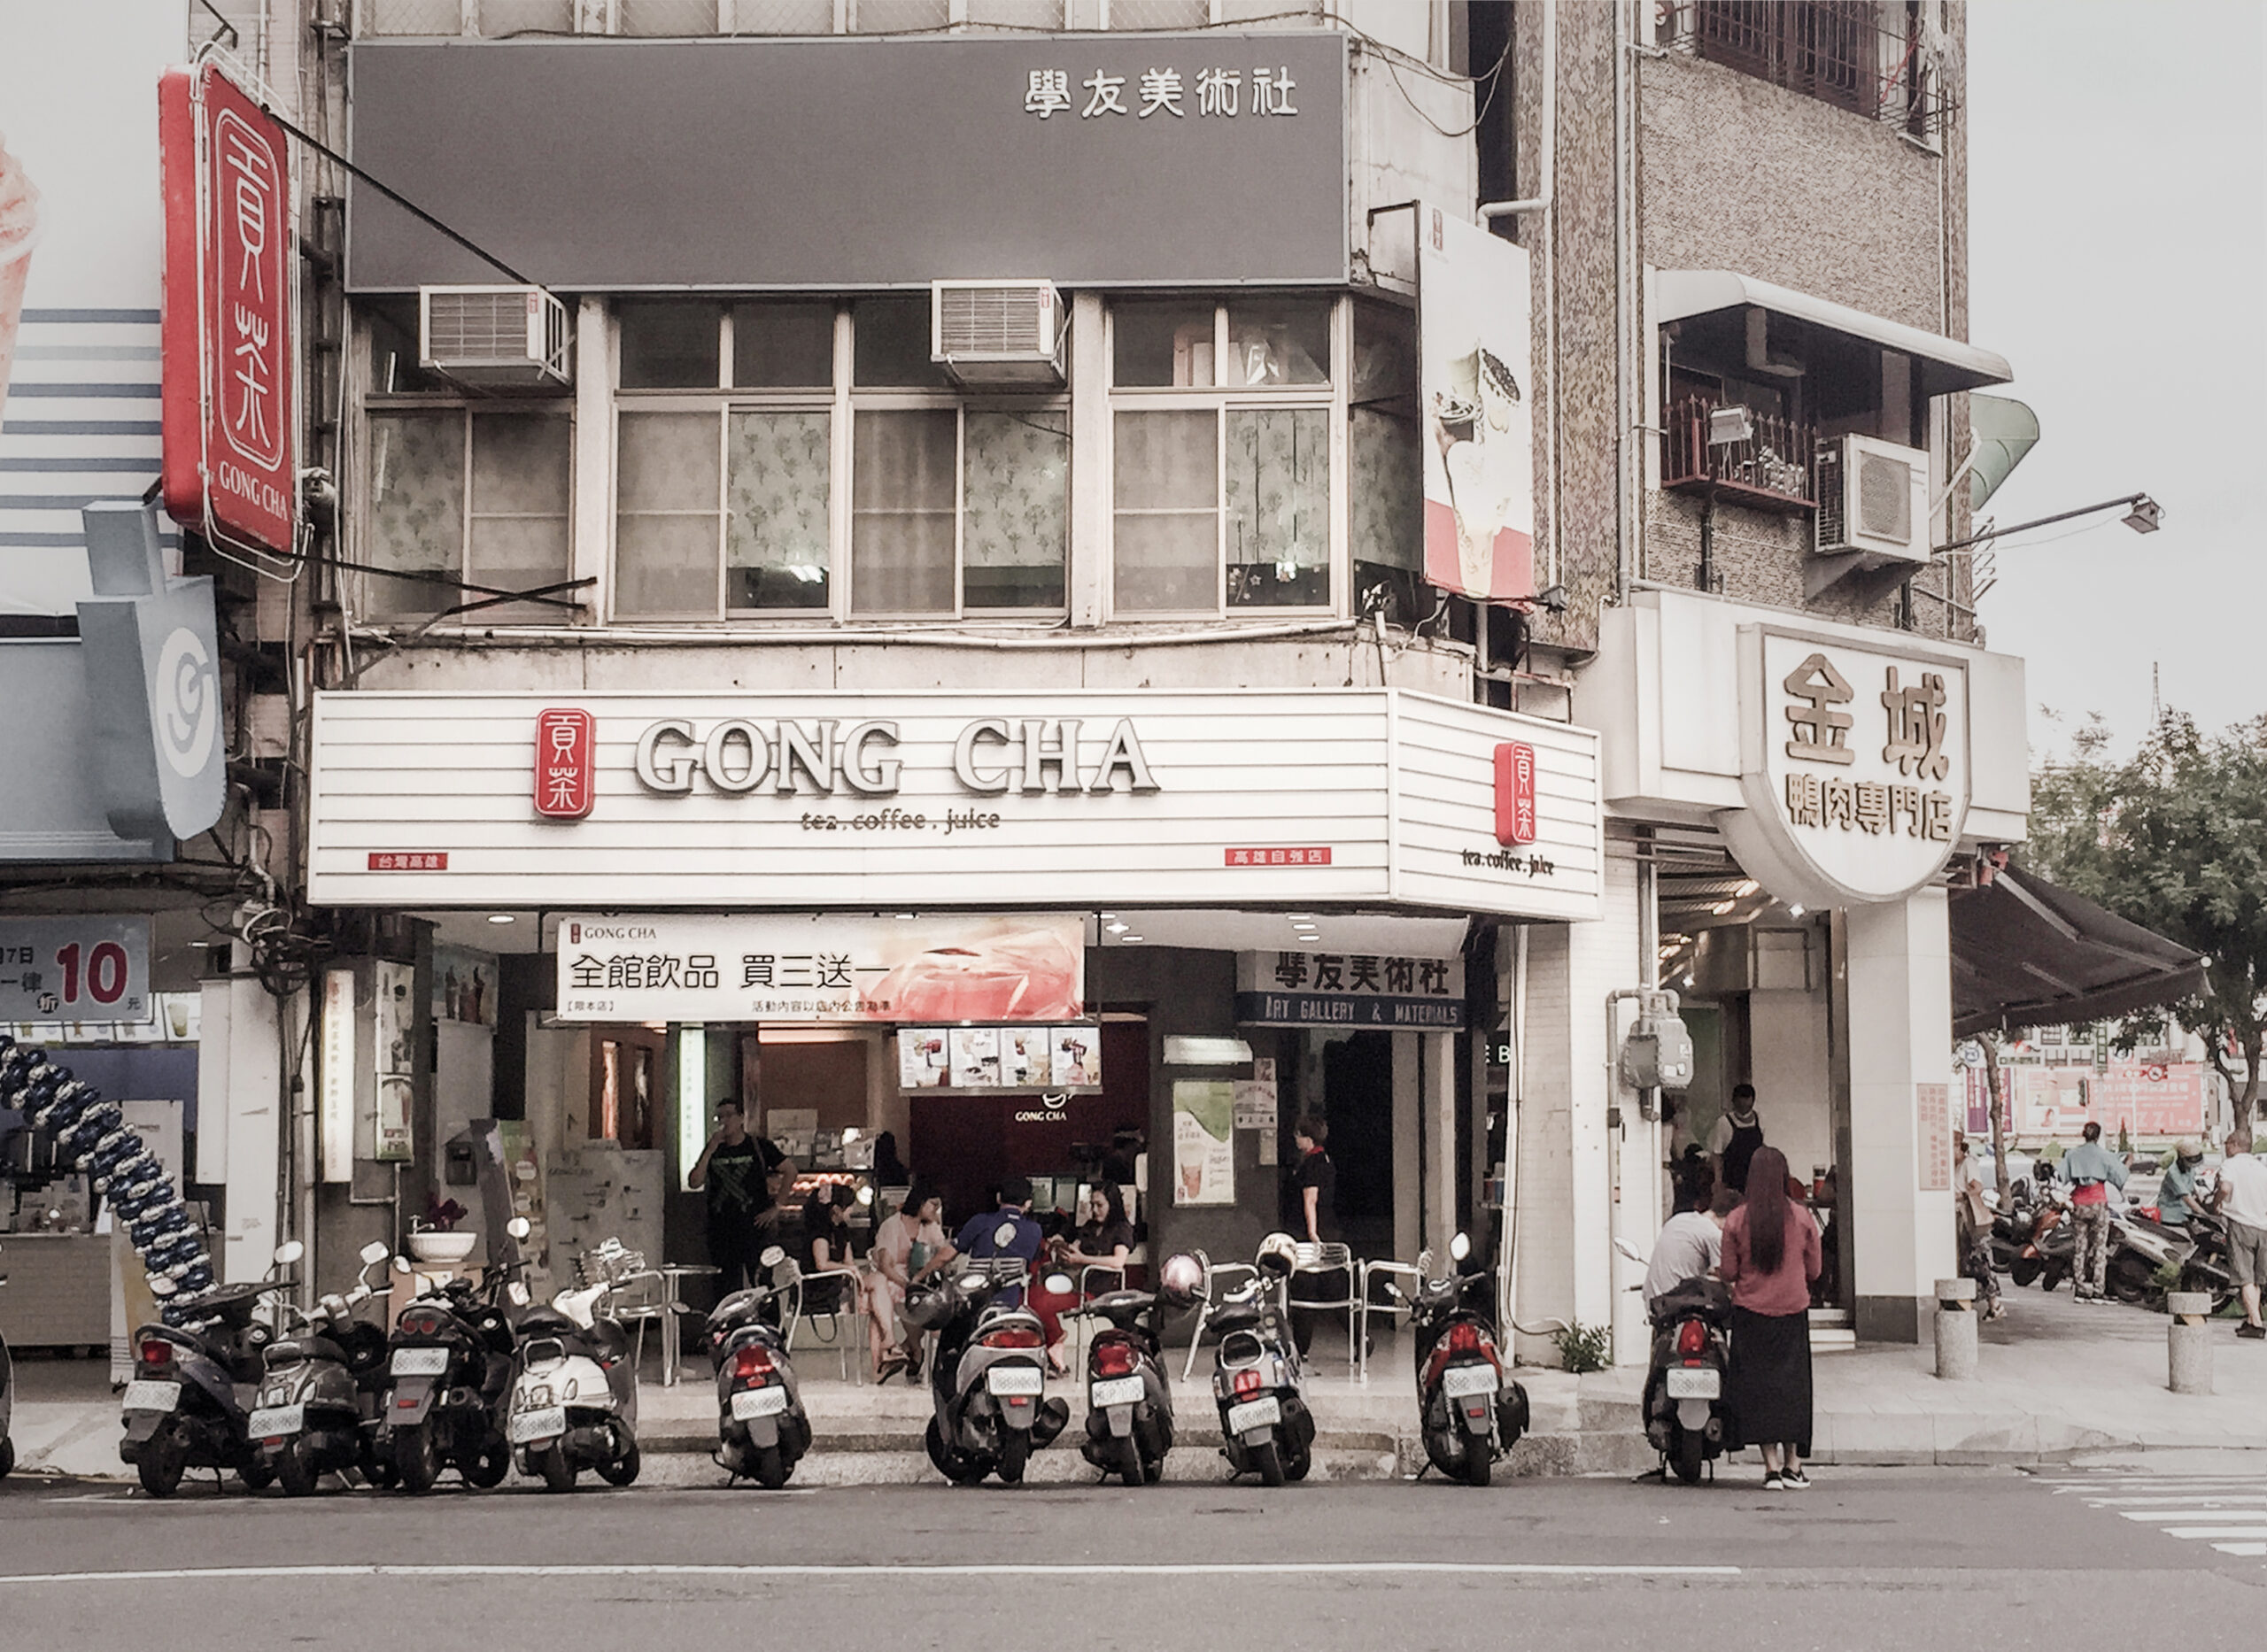 Old Gong Cha Store in Taiwan